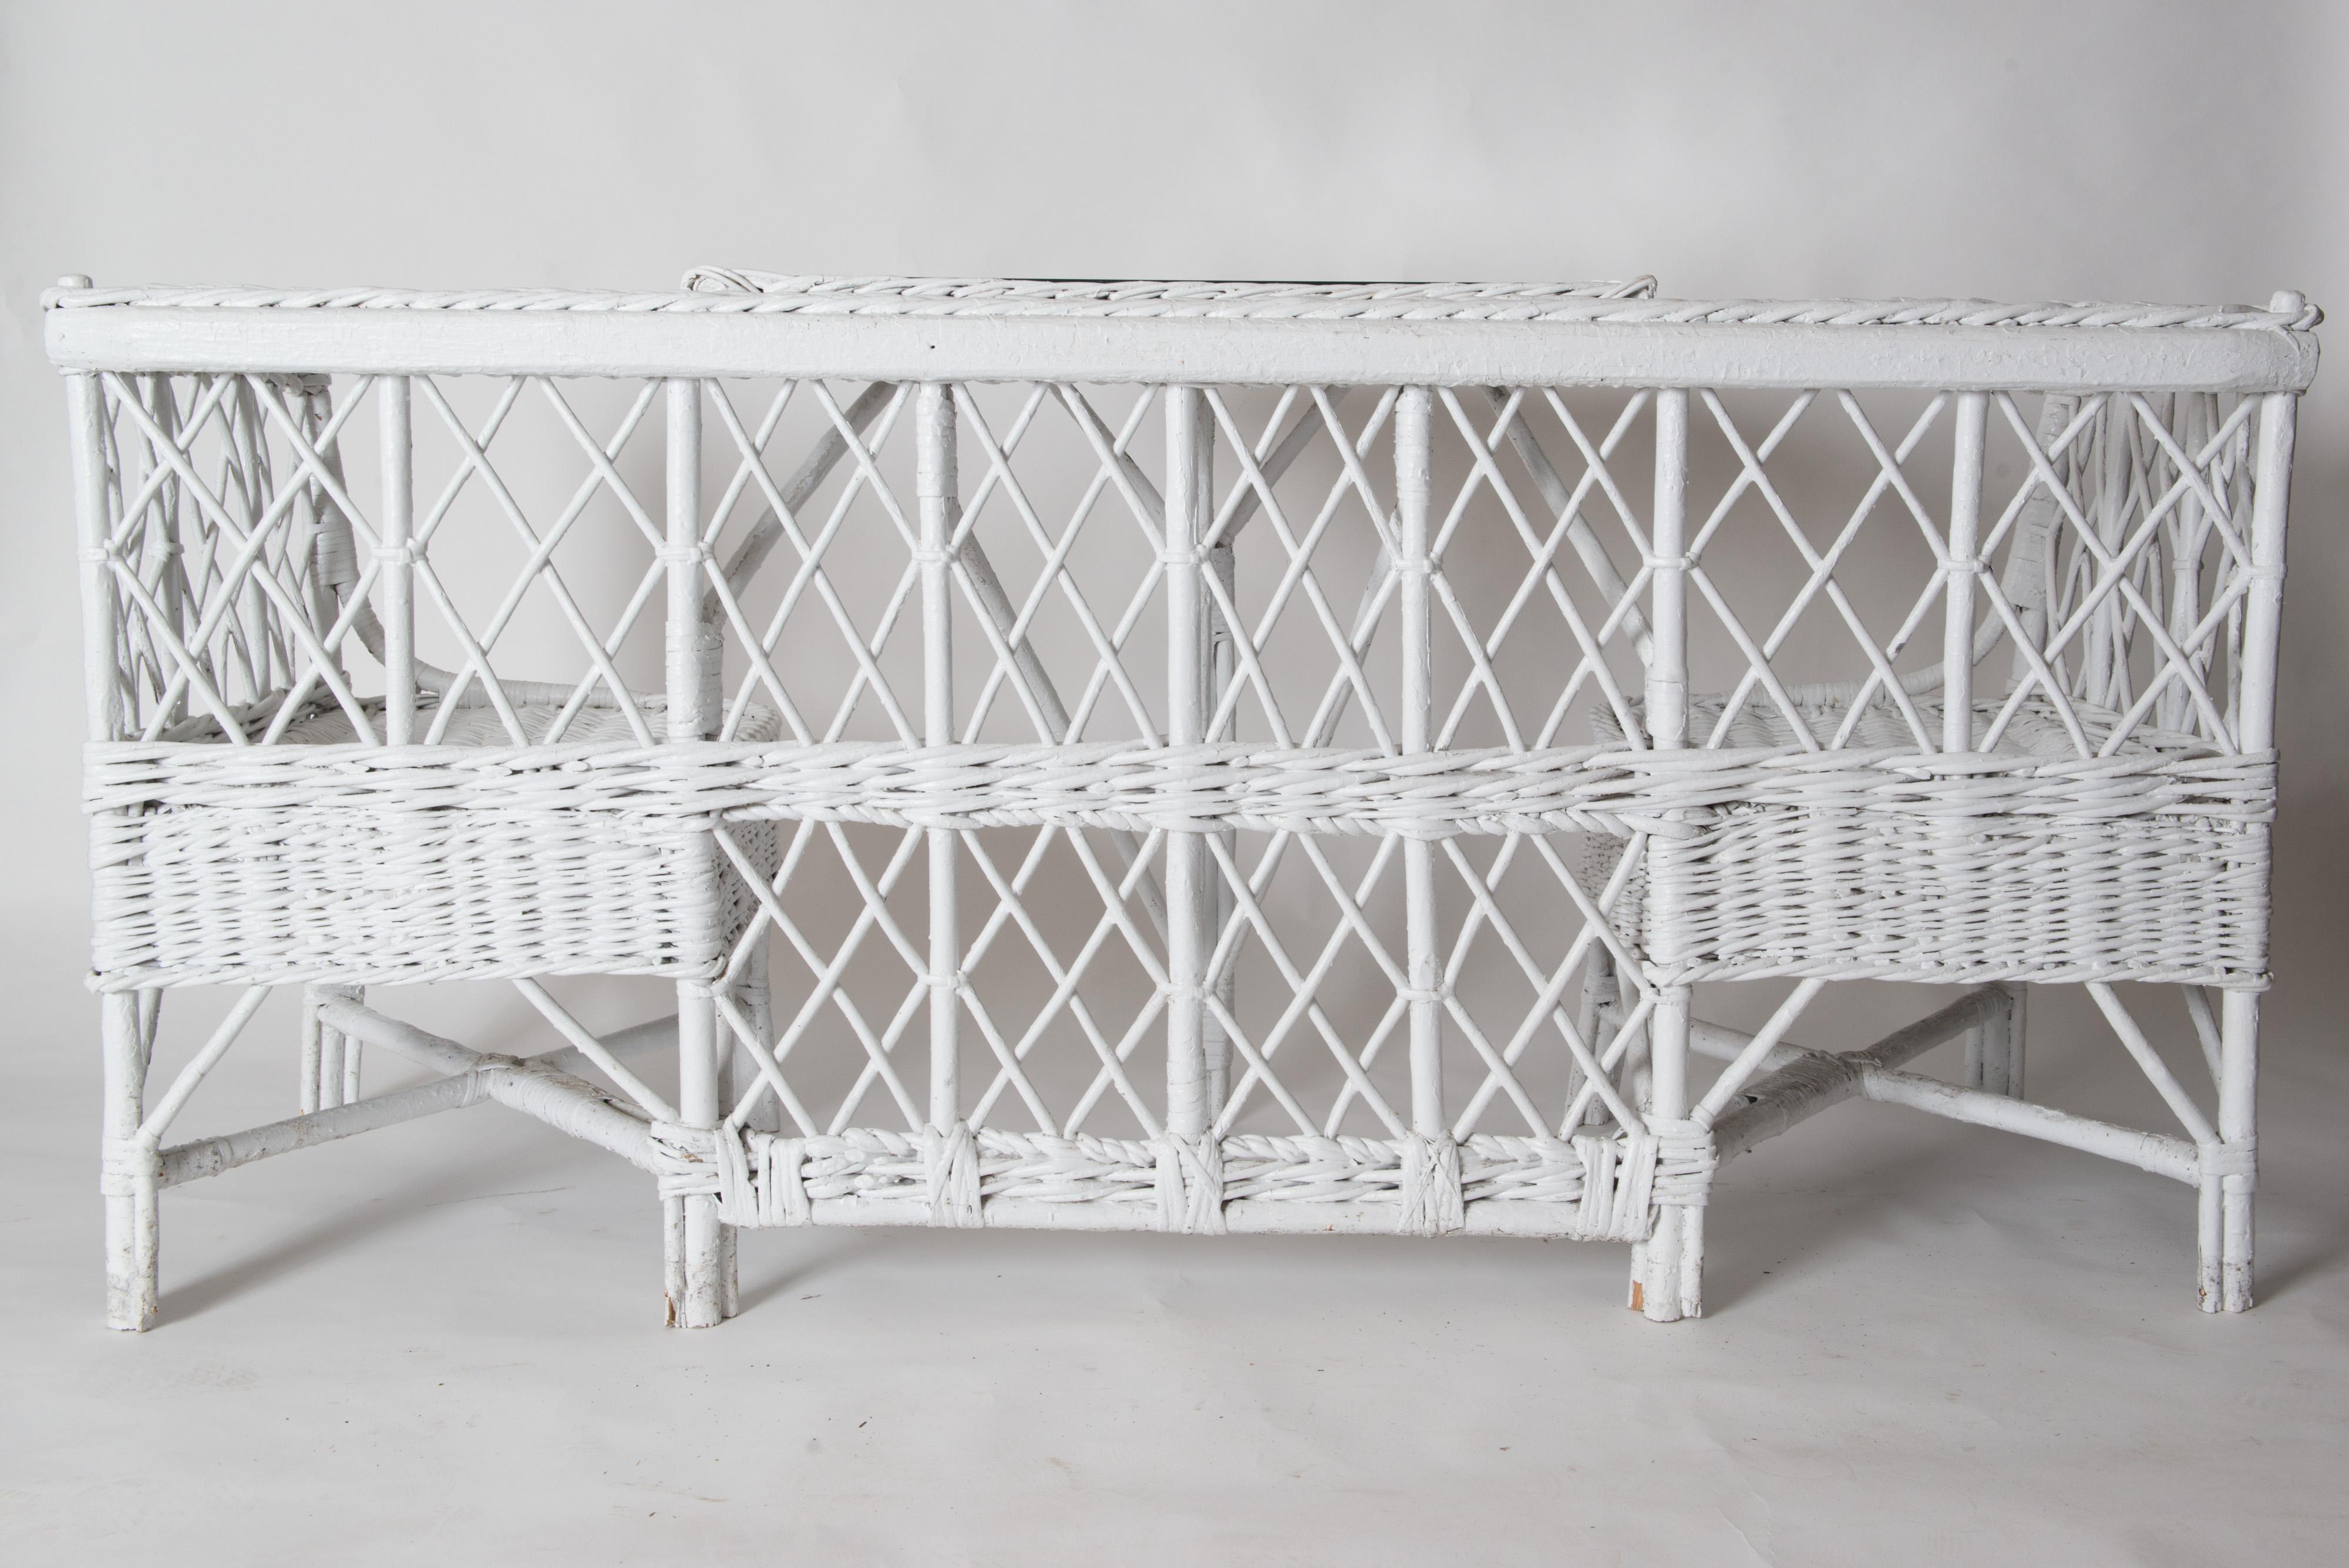 Very rare vintage wicker/reed banquette or booth. One wicker piece includes two corner chairs and an attached wicker table with a protective glass top. A very fun unique piece for a porch, a playroom, a pool house, anywhere you want a conversation